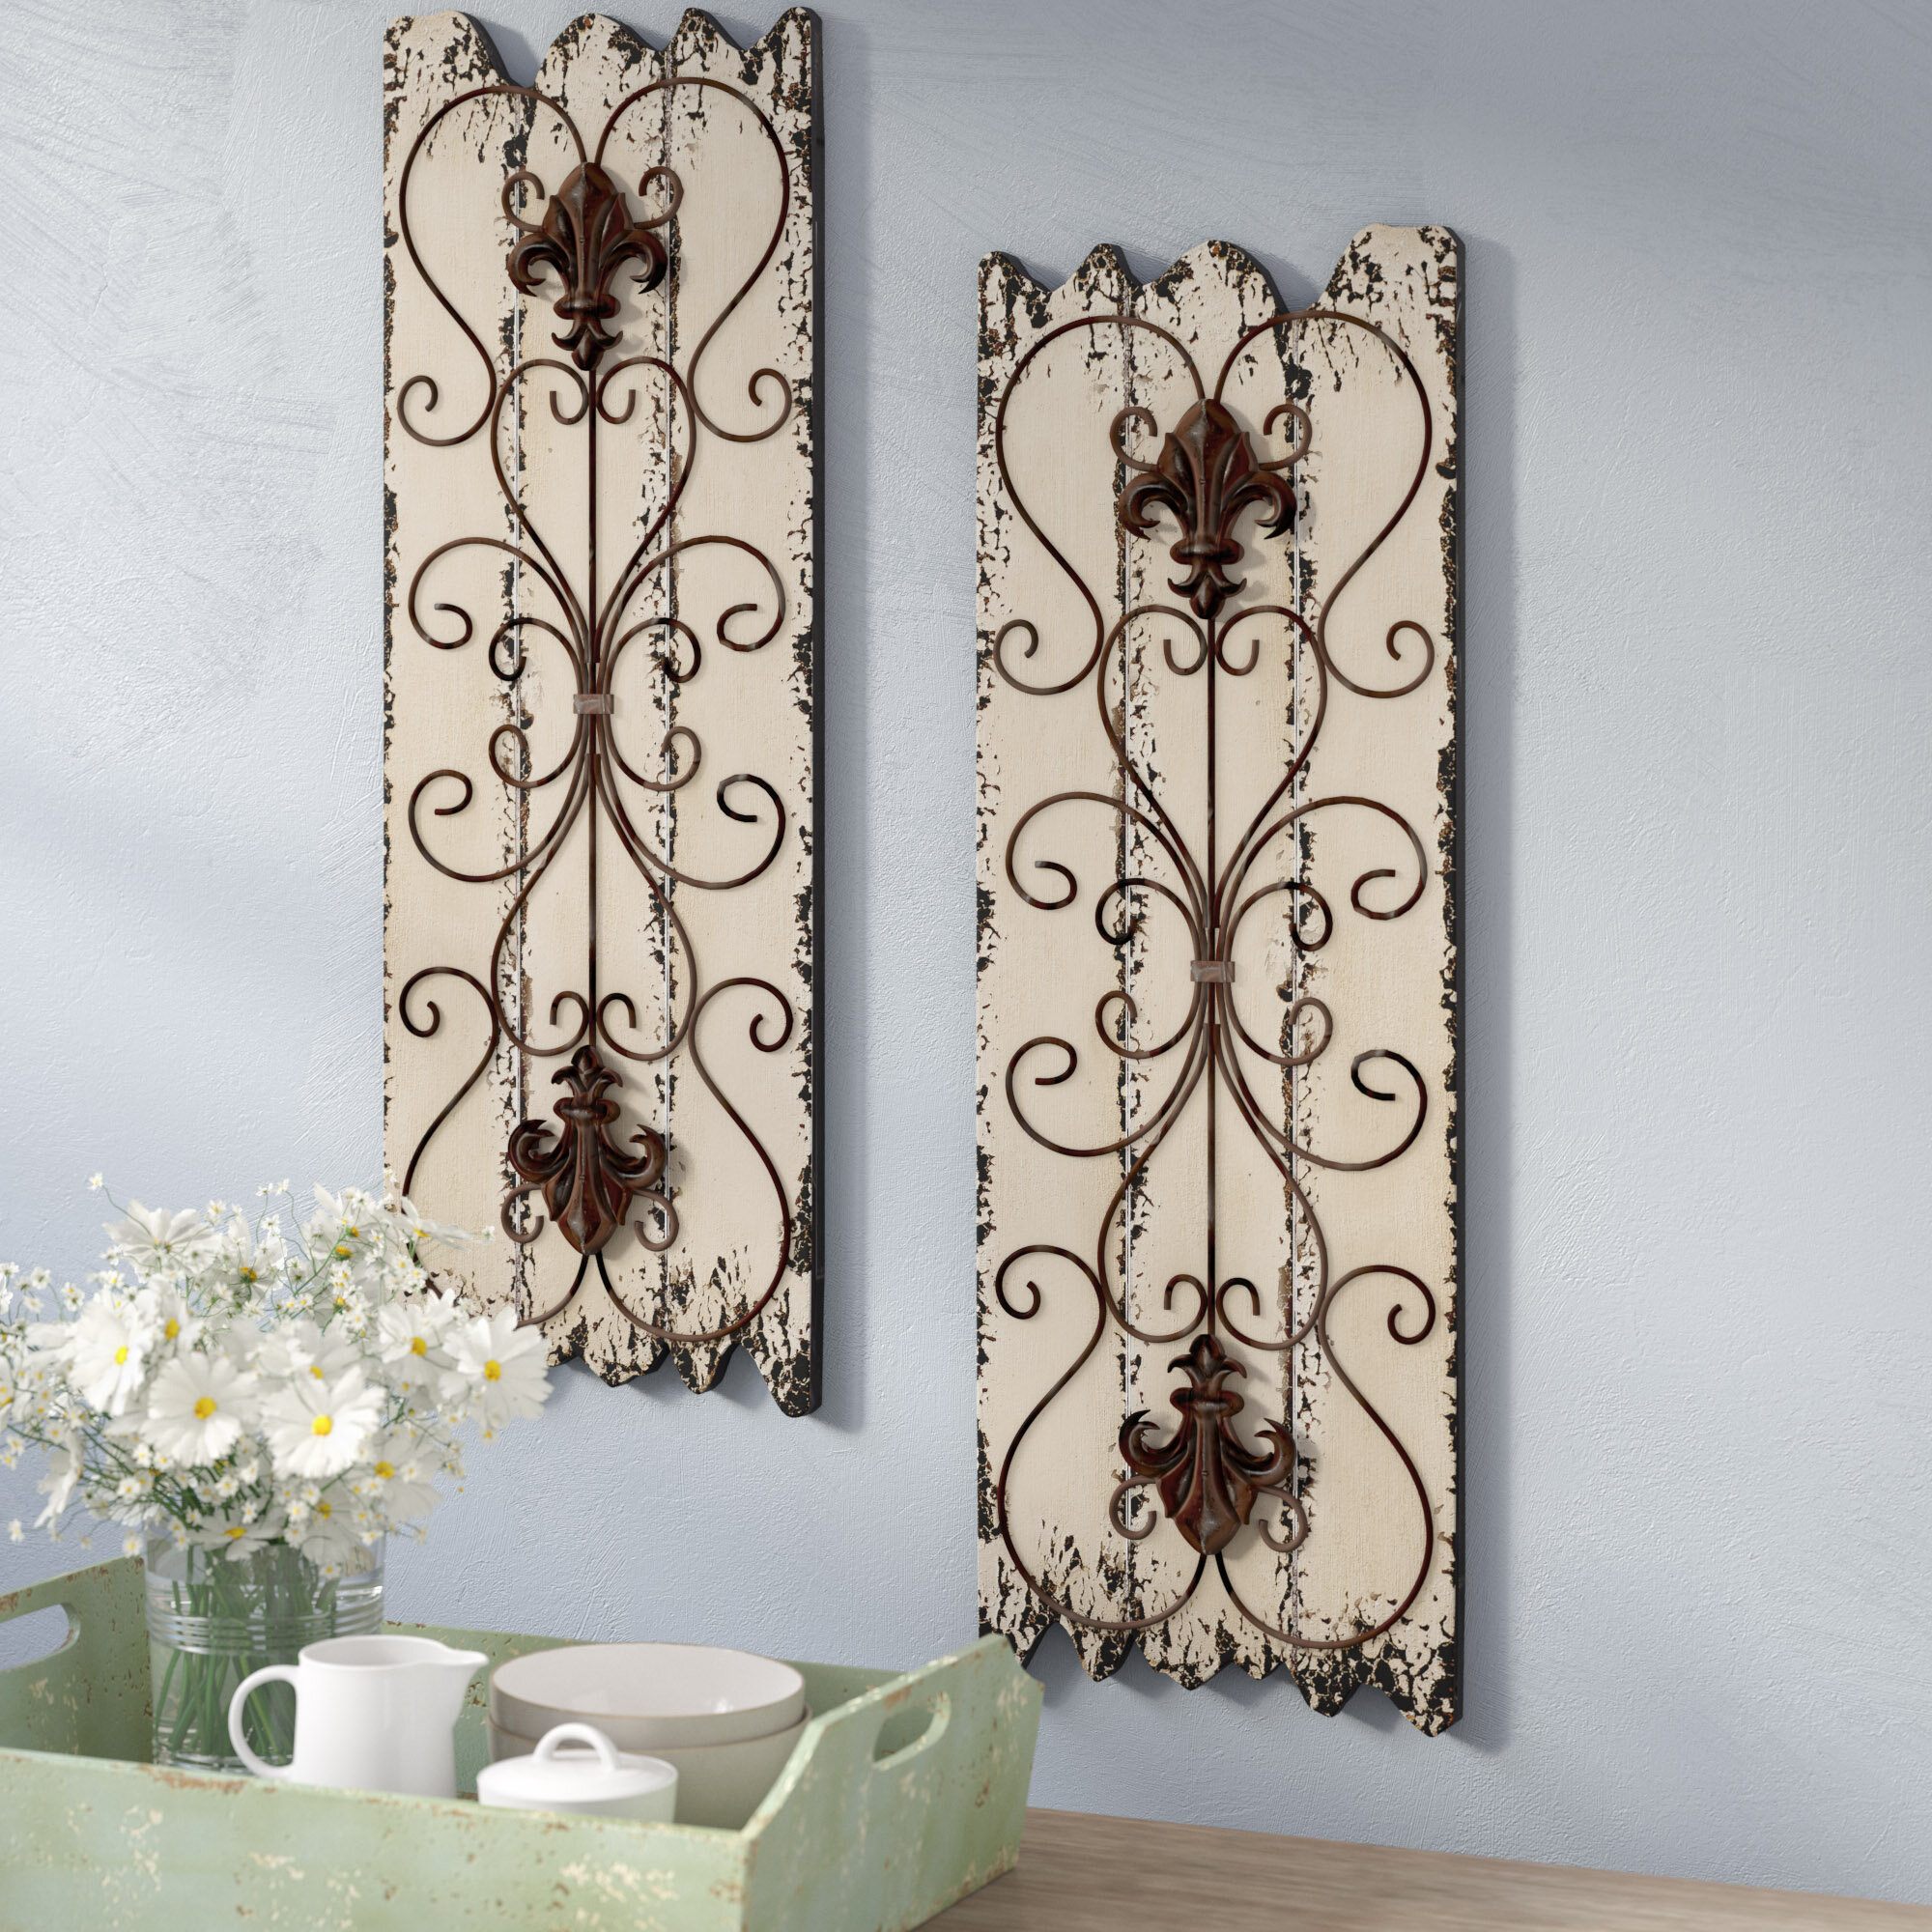 Ophelia & Co Floral Metal Wall Décor Set of 2 